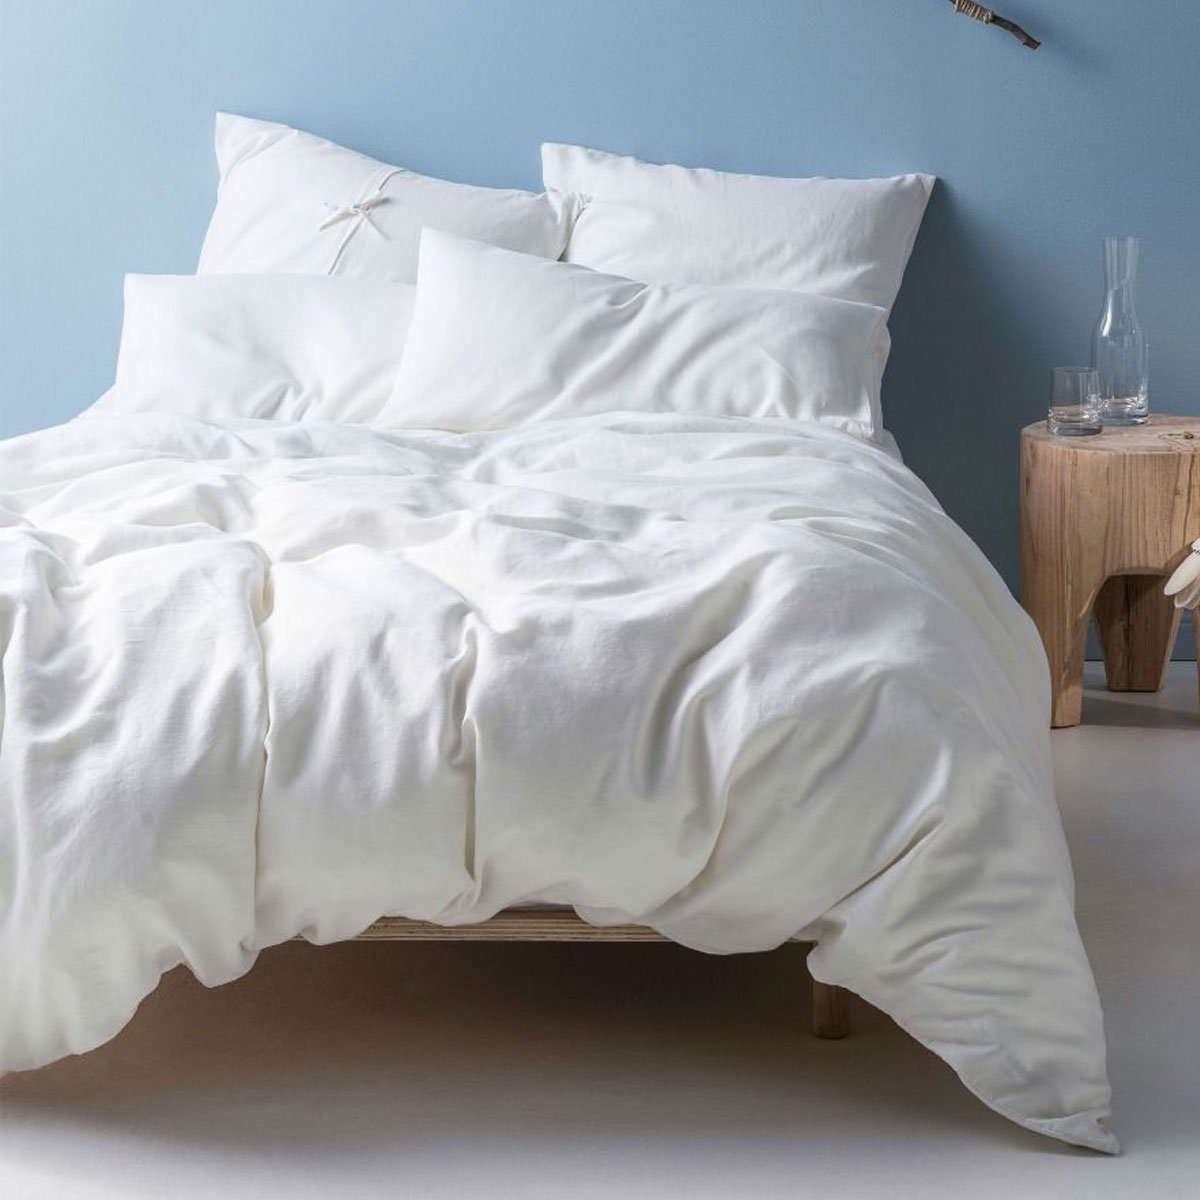 Nimes Linen Quilt Cover Set WHITE by Linen House